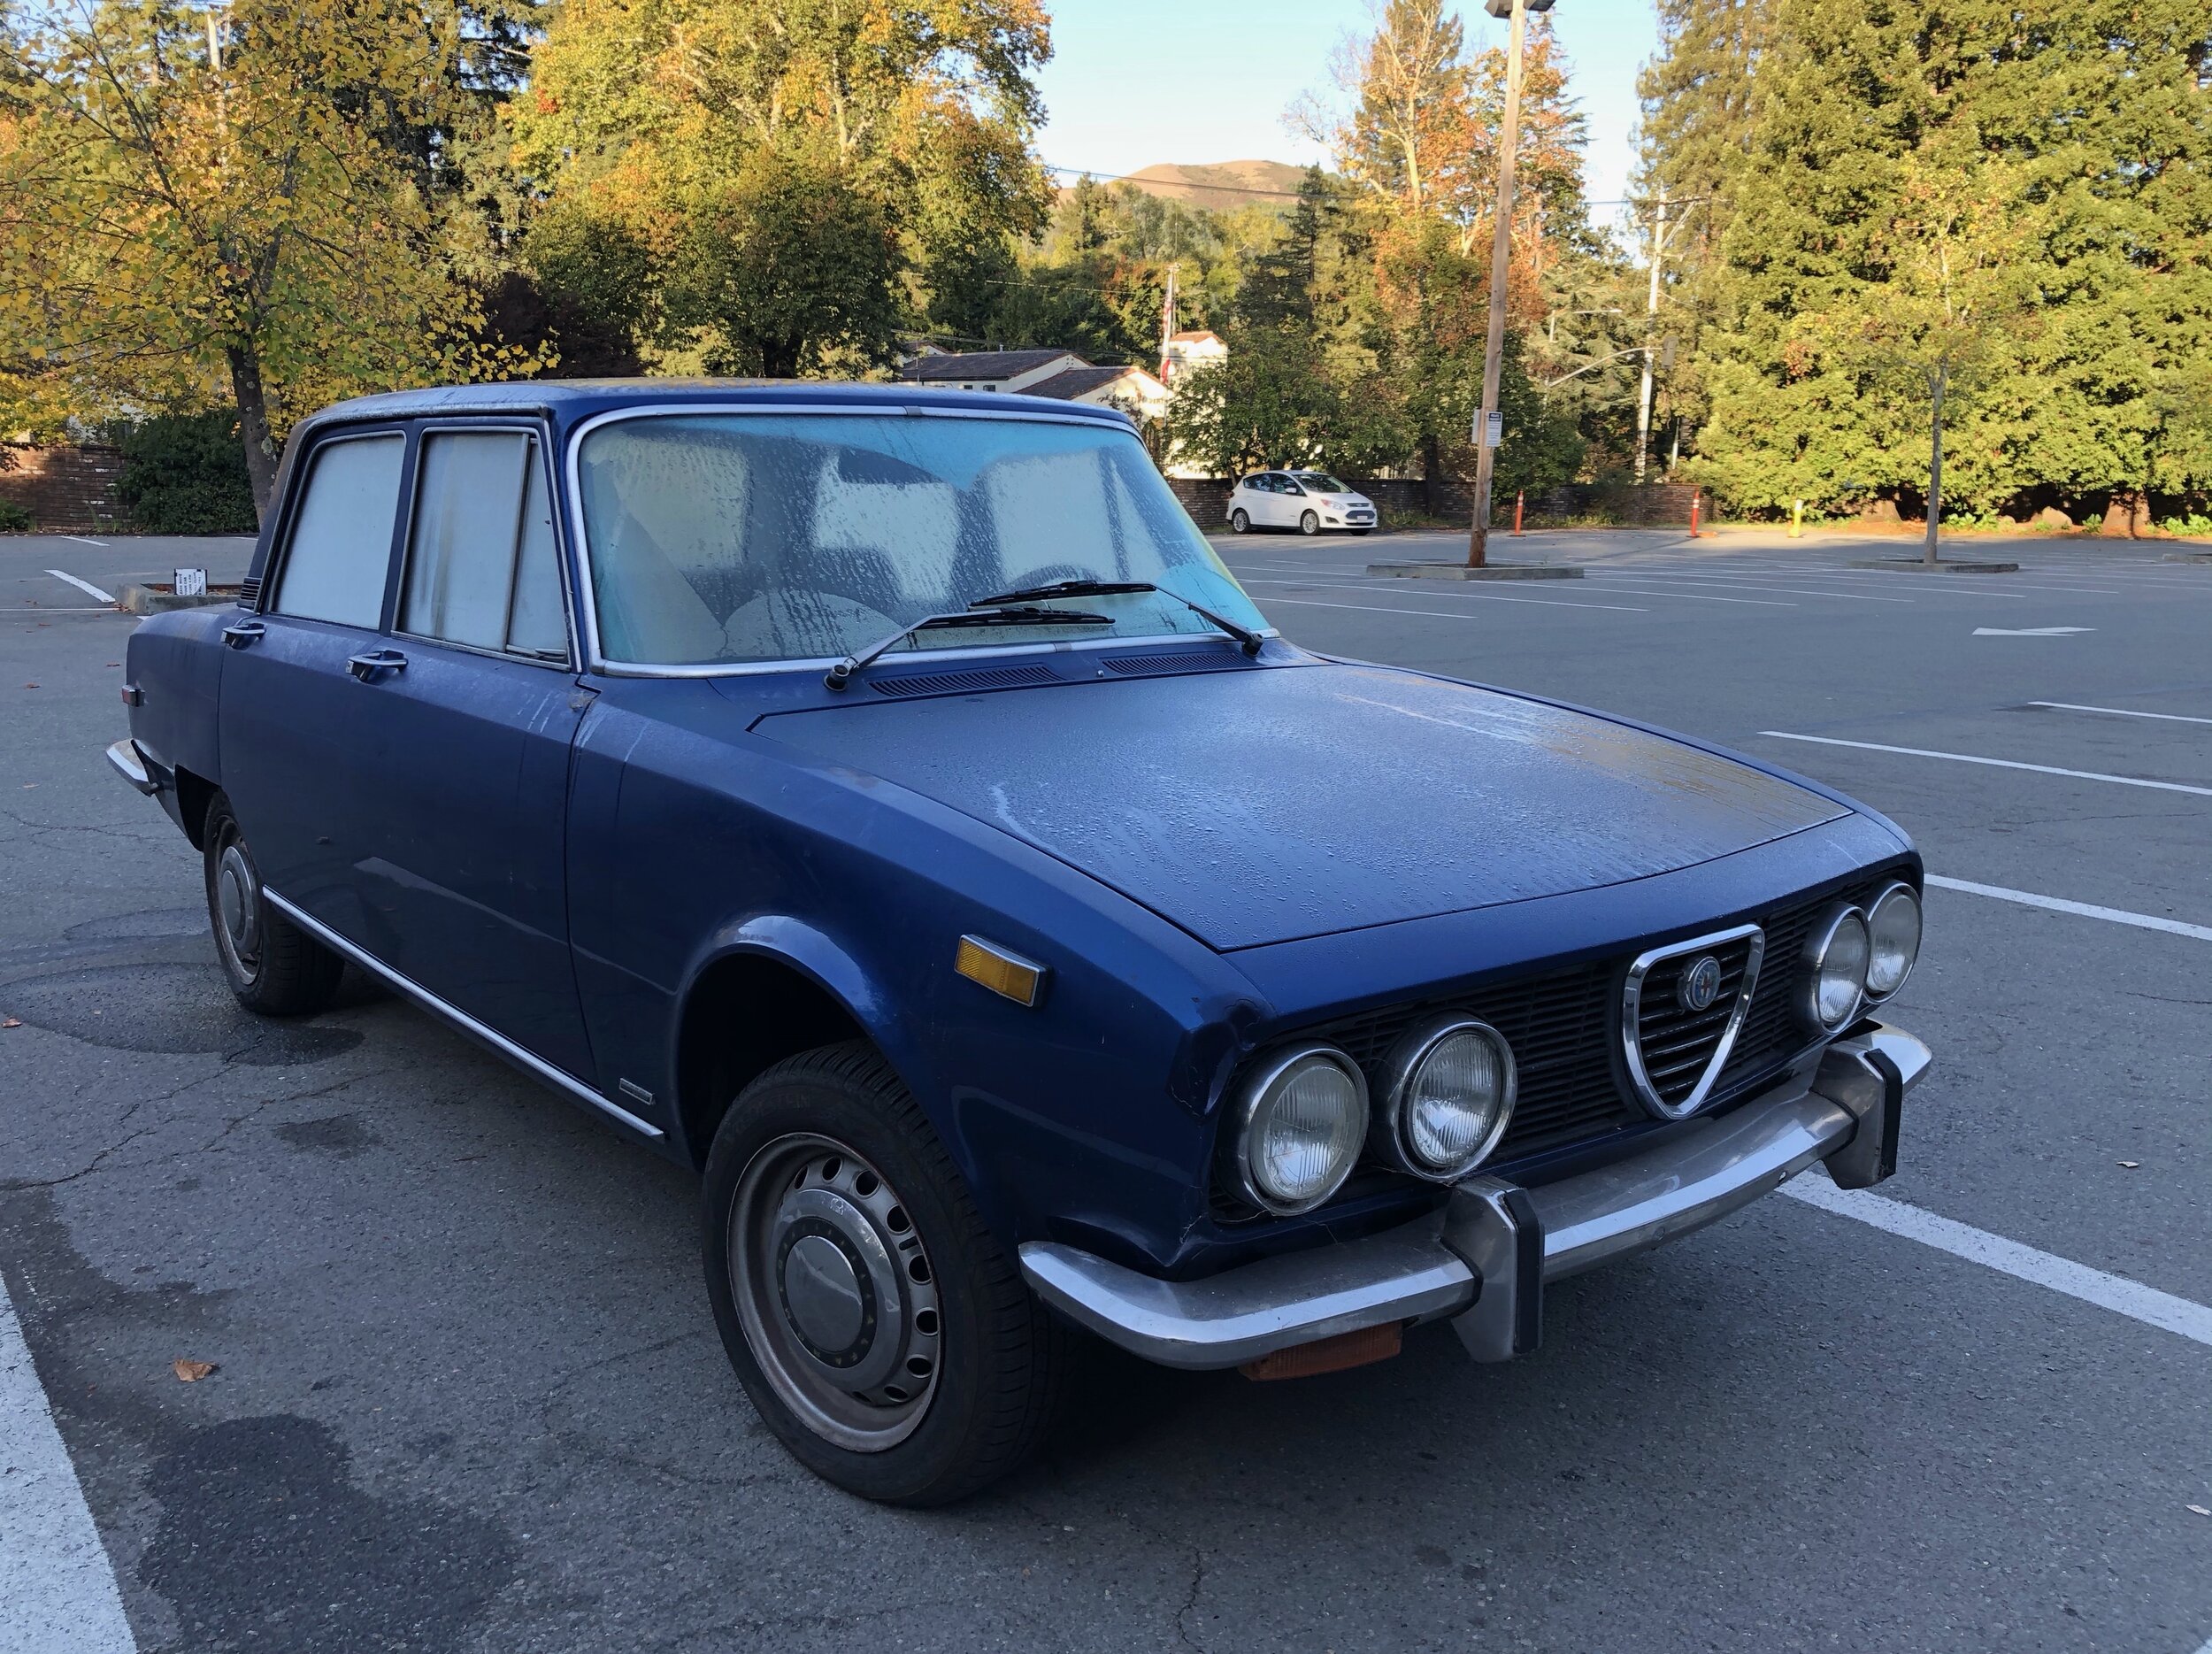 As I approached with a side view, I thought "Vintage Toyota or Datsun."  Wrong.  They just copied the design from Alfa Romeo.